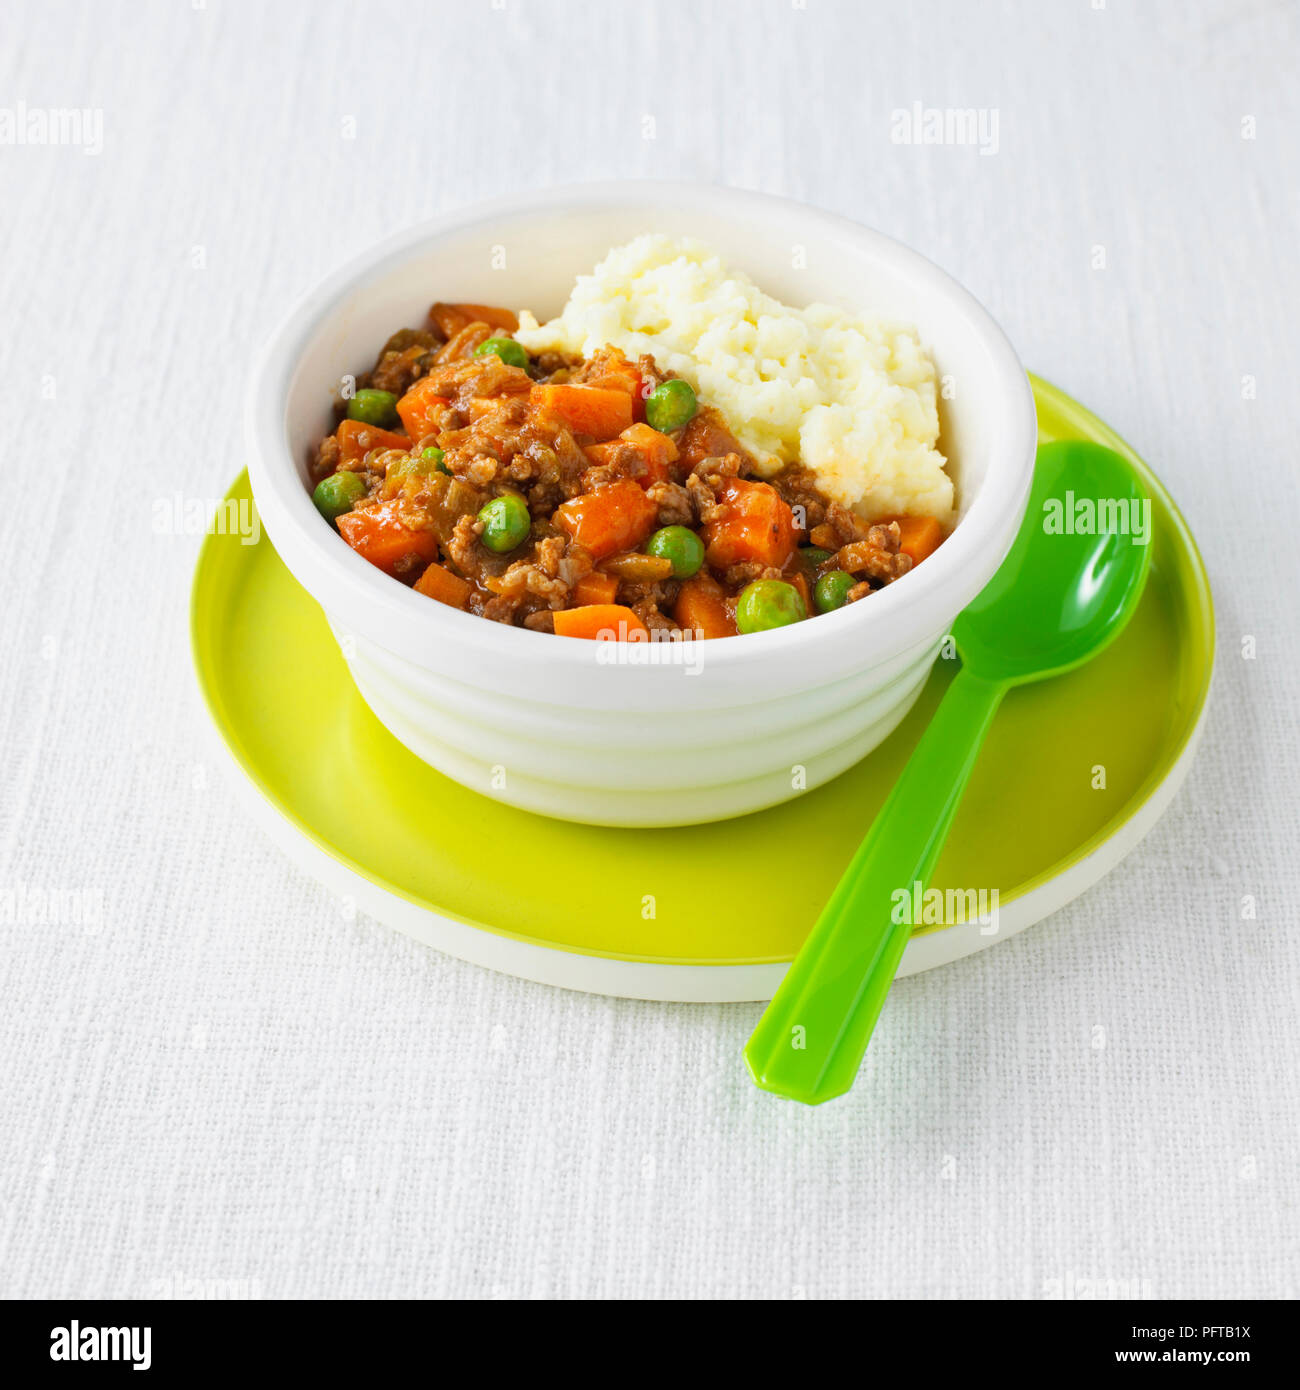 Minced beef, carrots, peas, and mash, children's food Stock Photo